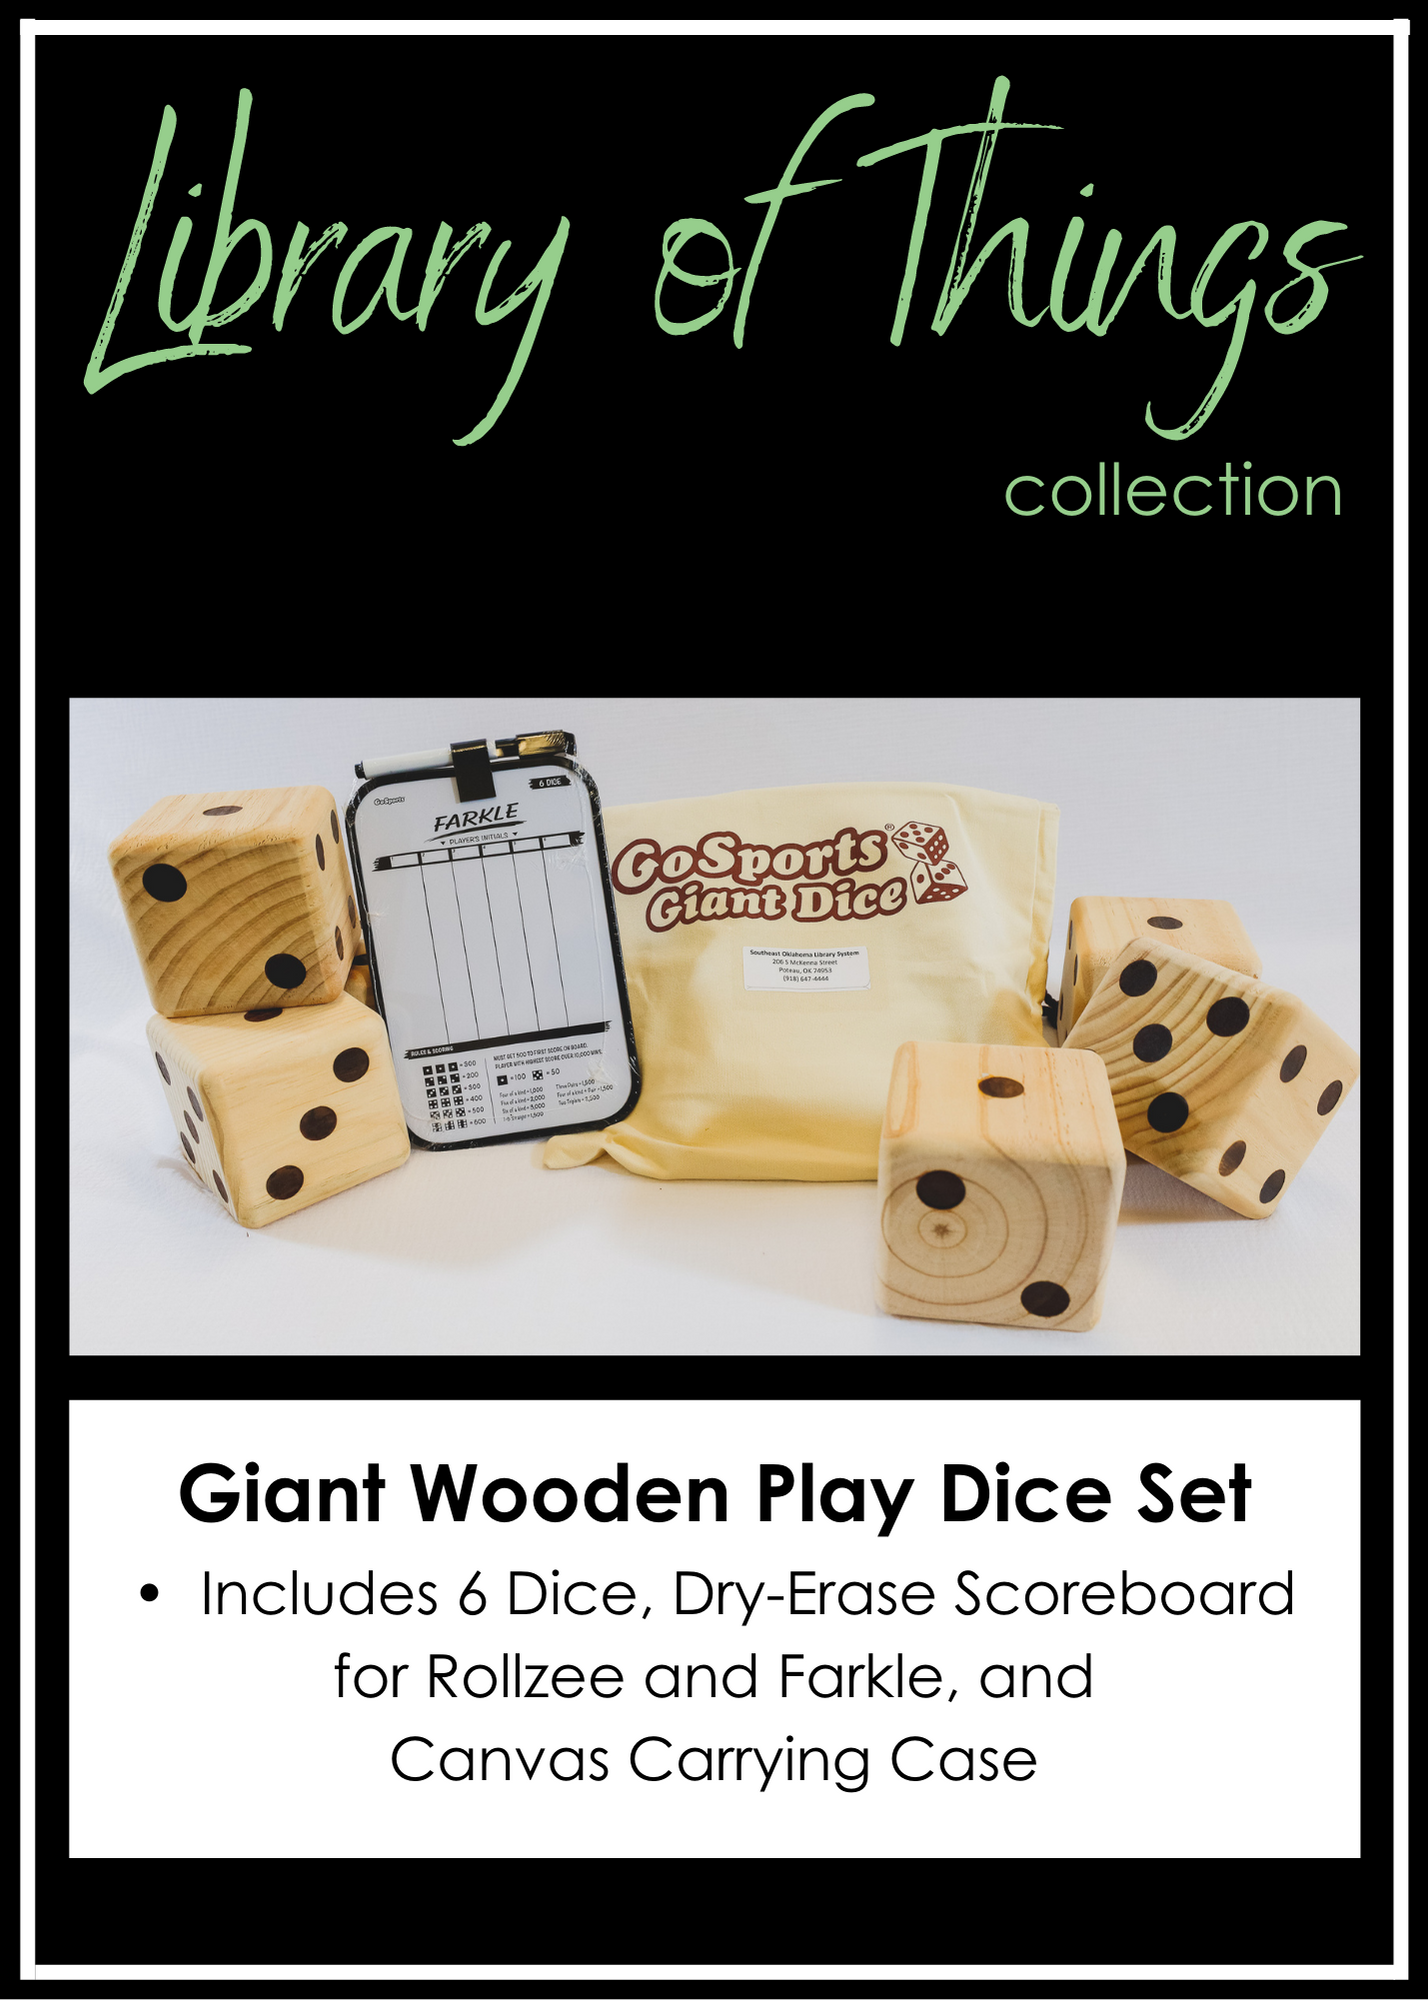 Giant Wooden Play Dice Set